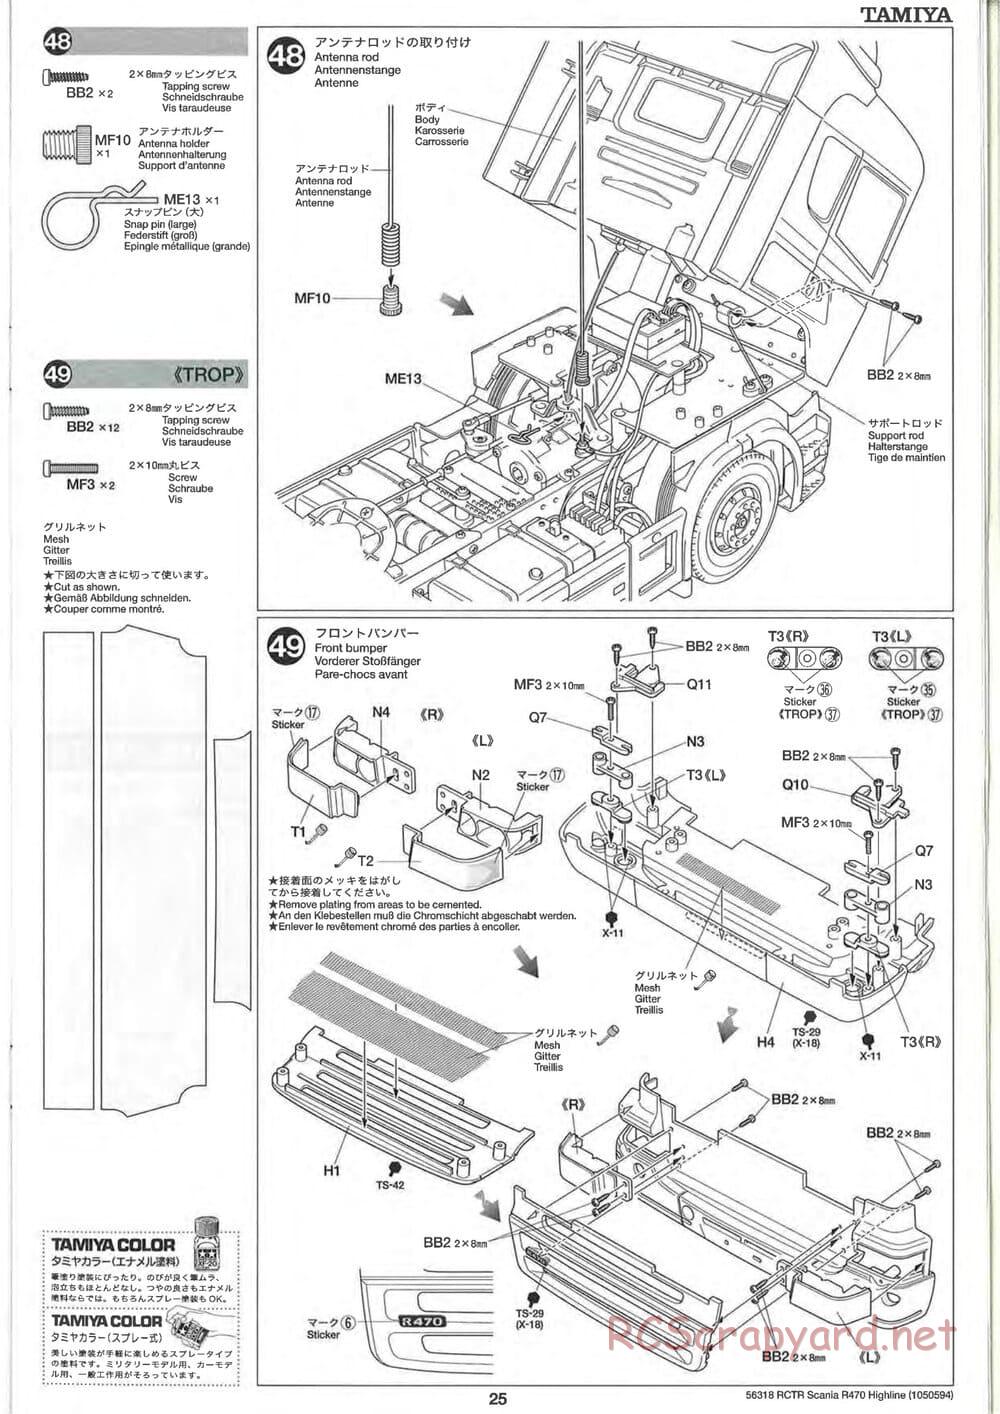 Tamiya - Scania R470 Highline Tractor Truck Chassis - Manual - Page 25